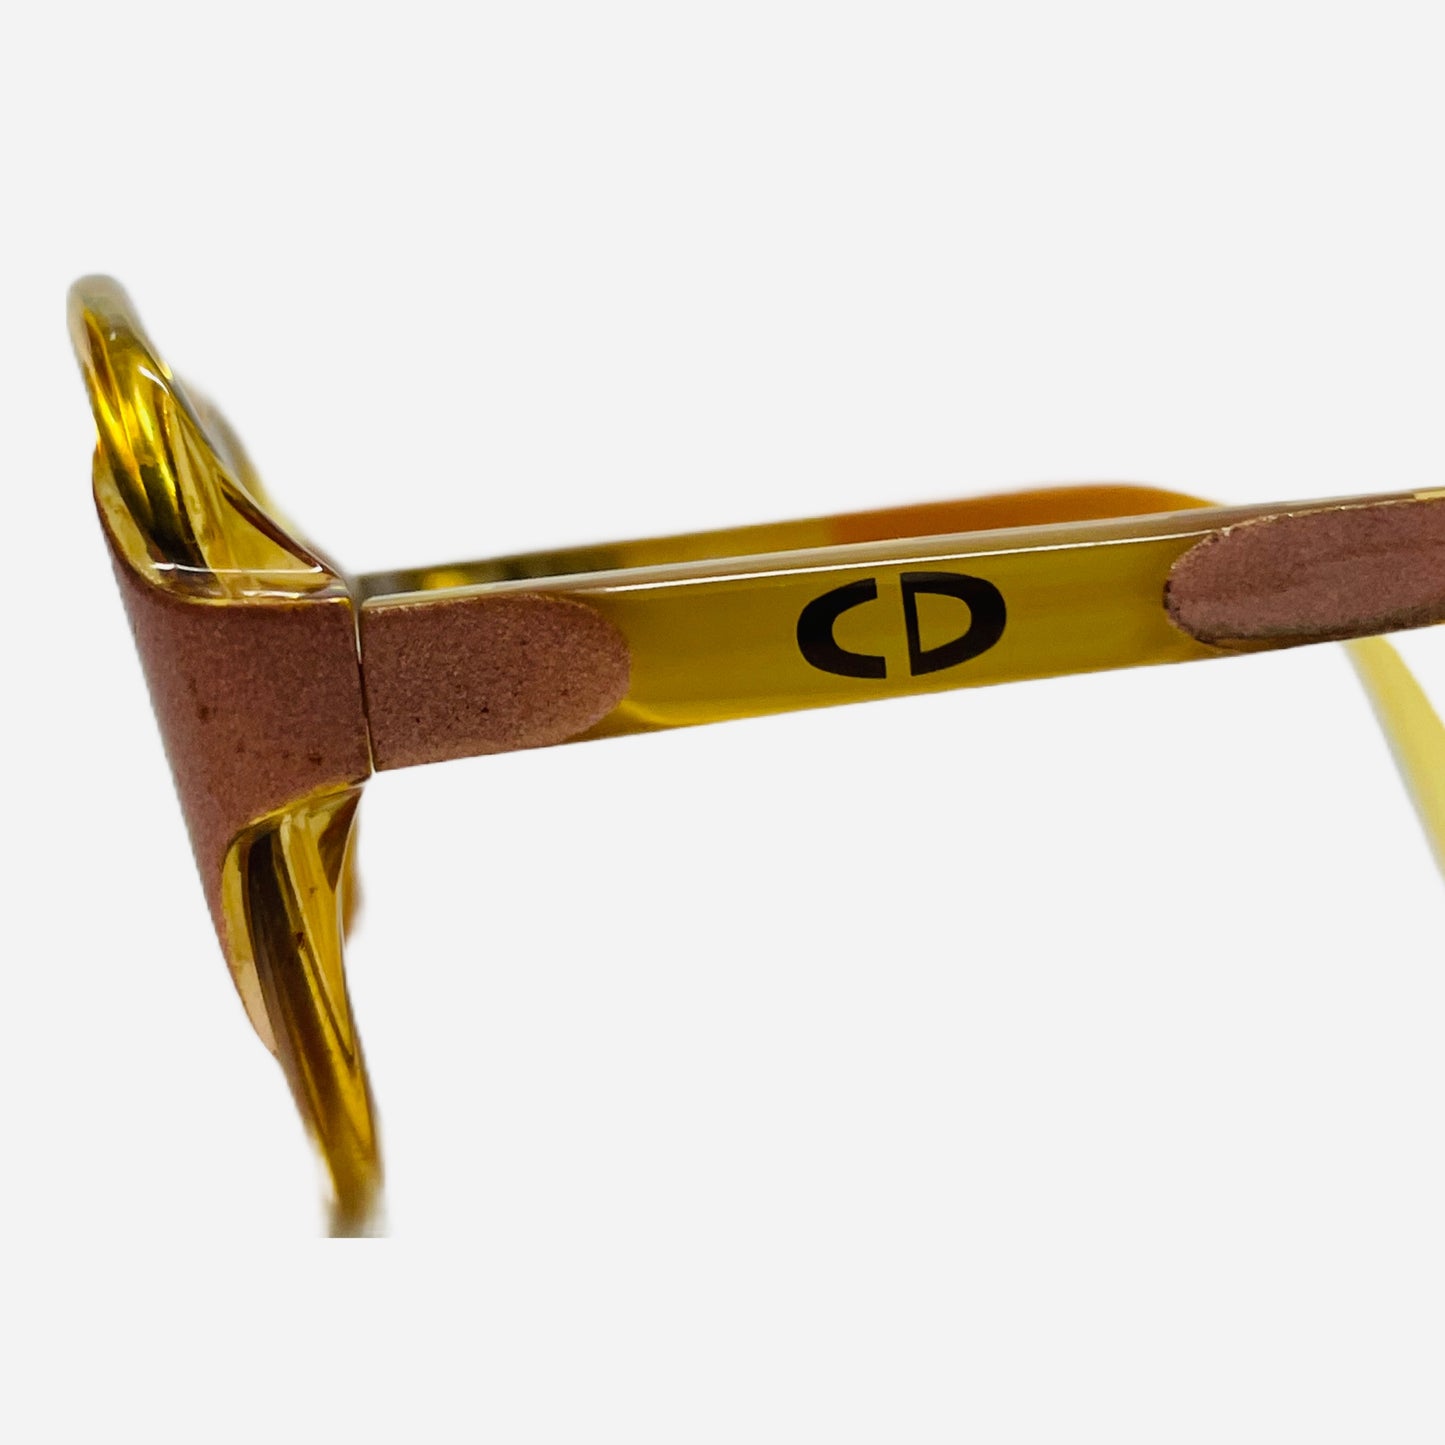    Vintage-Christian-Dior-Sonnenbrille-Sonnenbrille-2596-Optyl-the-seekers-side_